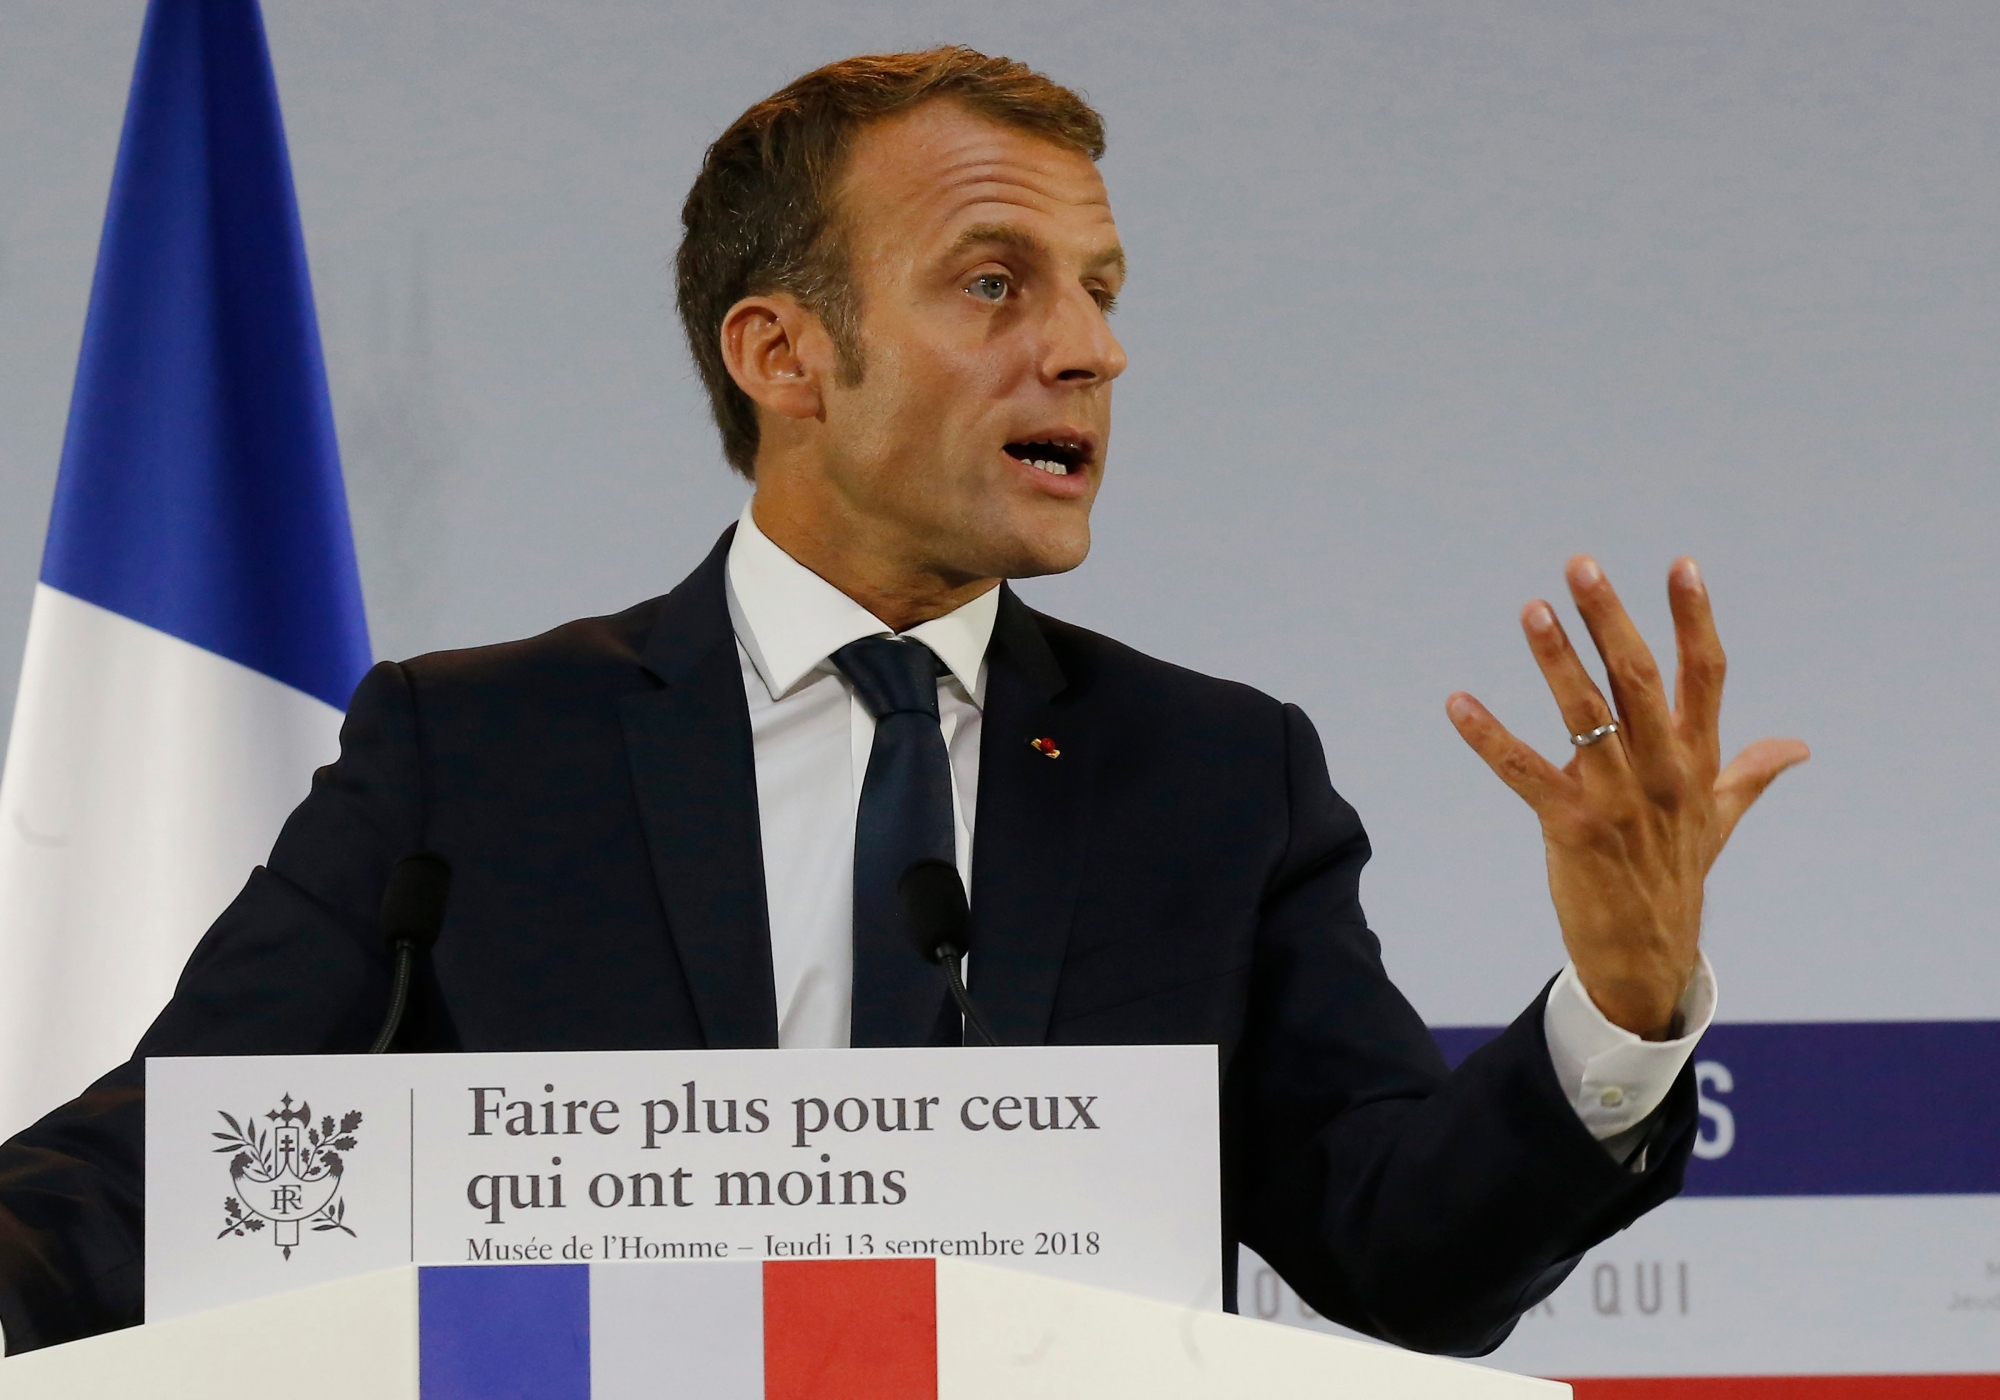 French President Emmanuel Macron delivers a speech on poverty to social aid workers in Paris, France, Thursday, Sept. 13, 2018. French President Emmanuel Macron has unveiled a 8-billion euro plan focusing on education and getting the unemployed back to work in an effort to combat poverty. Placard reads "make more for those who have less". (AP Photo/Michel Euler, Pool) France Macron Poverty